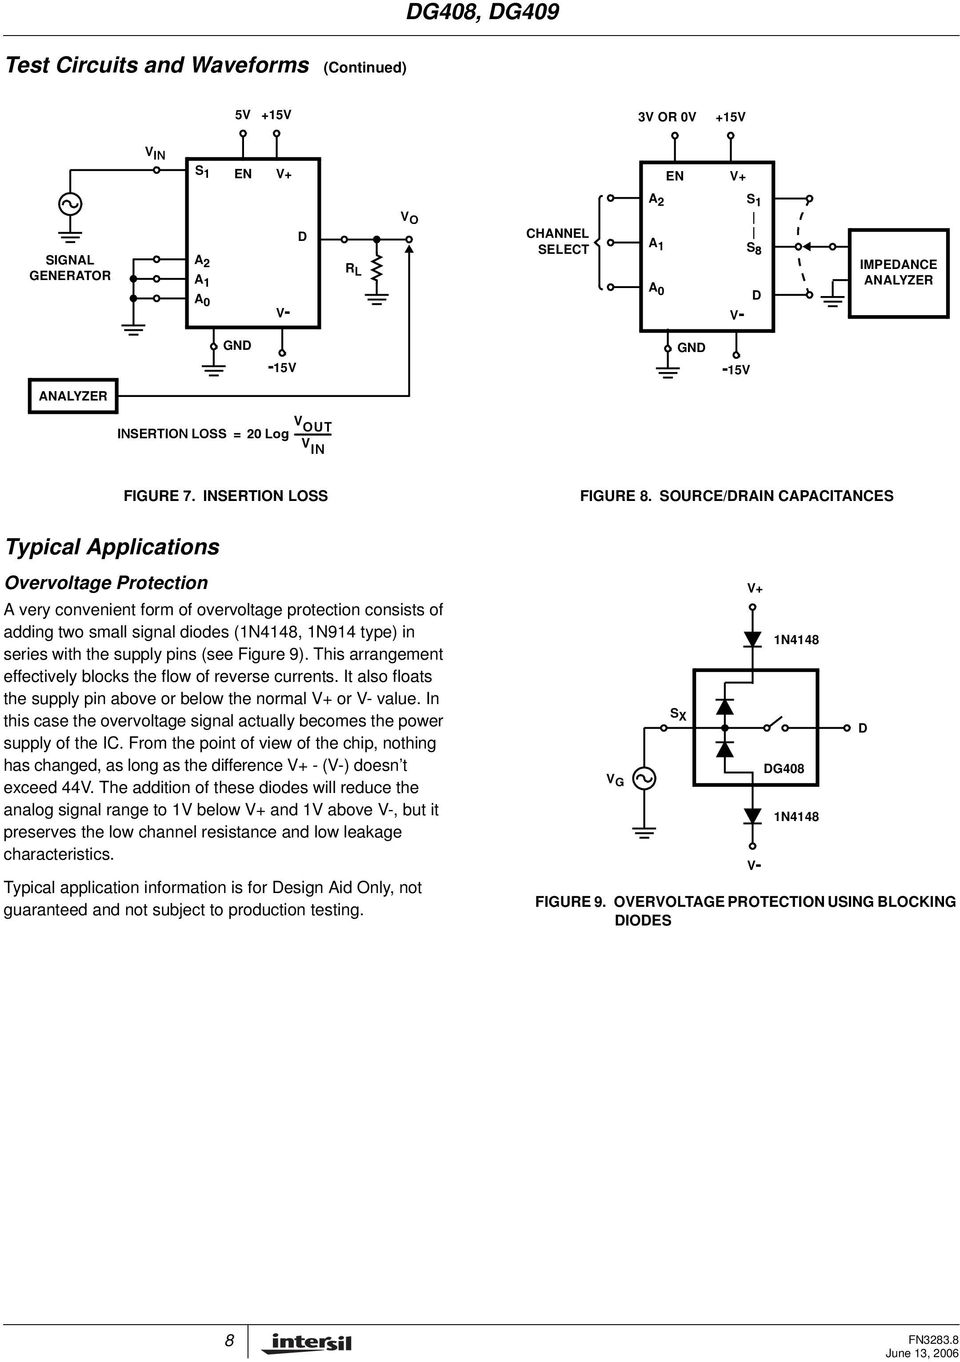 SOURCE/RAIN CAPACITANCES Typical Applications Overvoltage Protection A very convenient form of overvoltage protection consists of adding two small signal diodes (N448, N94 type) in series with the